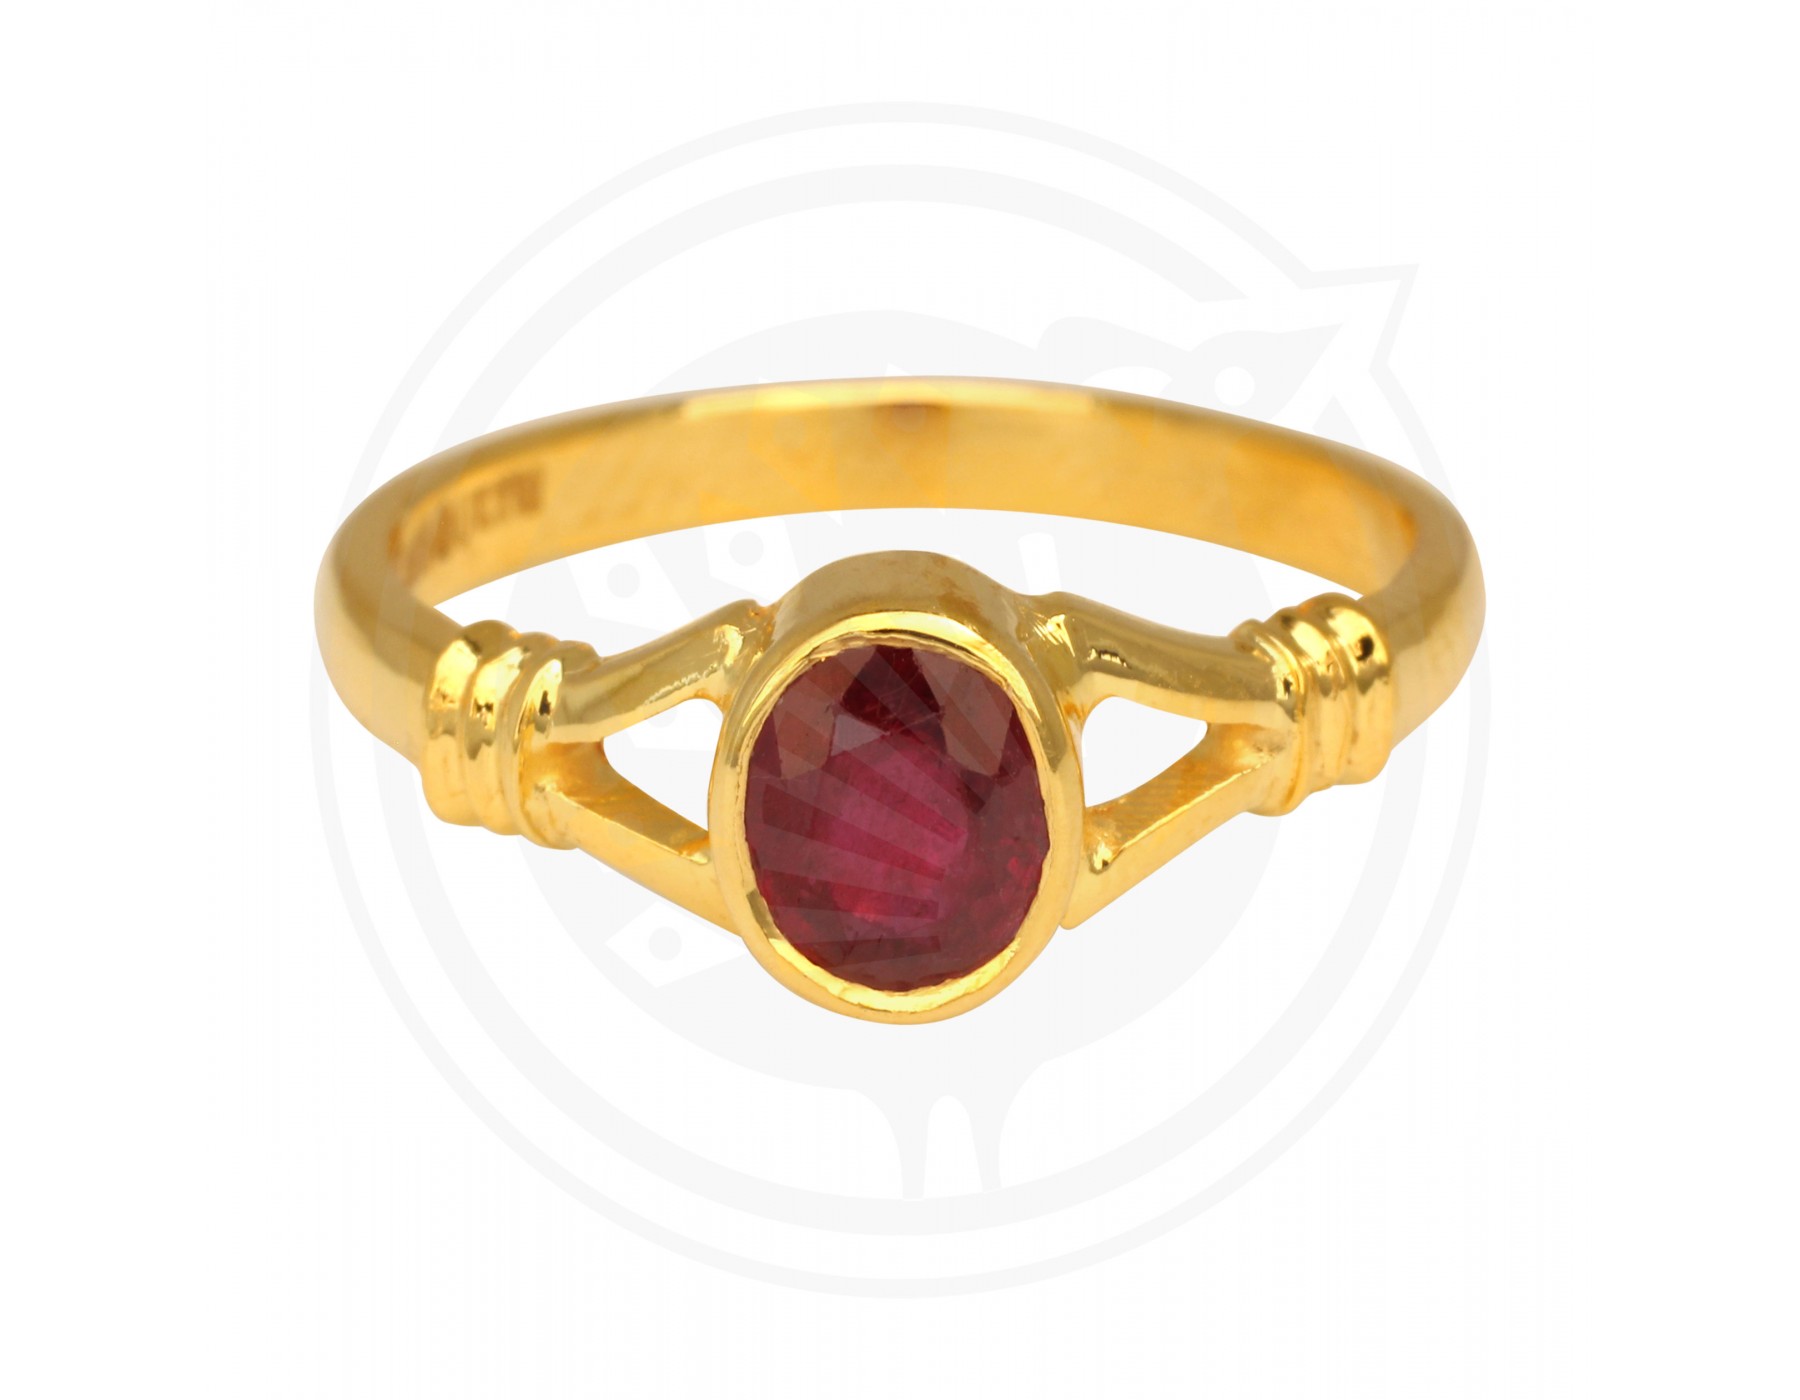 22Kt Gold Coral Stone Ring - RiLp24161 - 22Kt Gold ring studded with  precious ruby stone. Ruby cts = 5.1